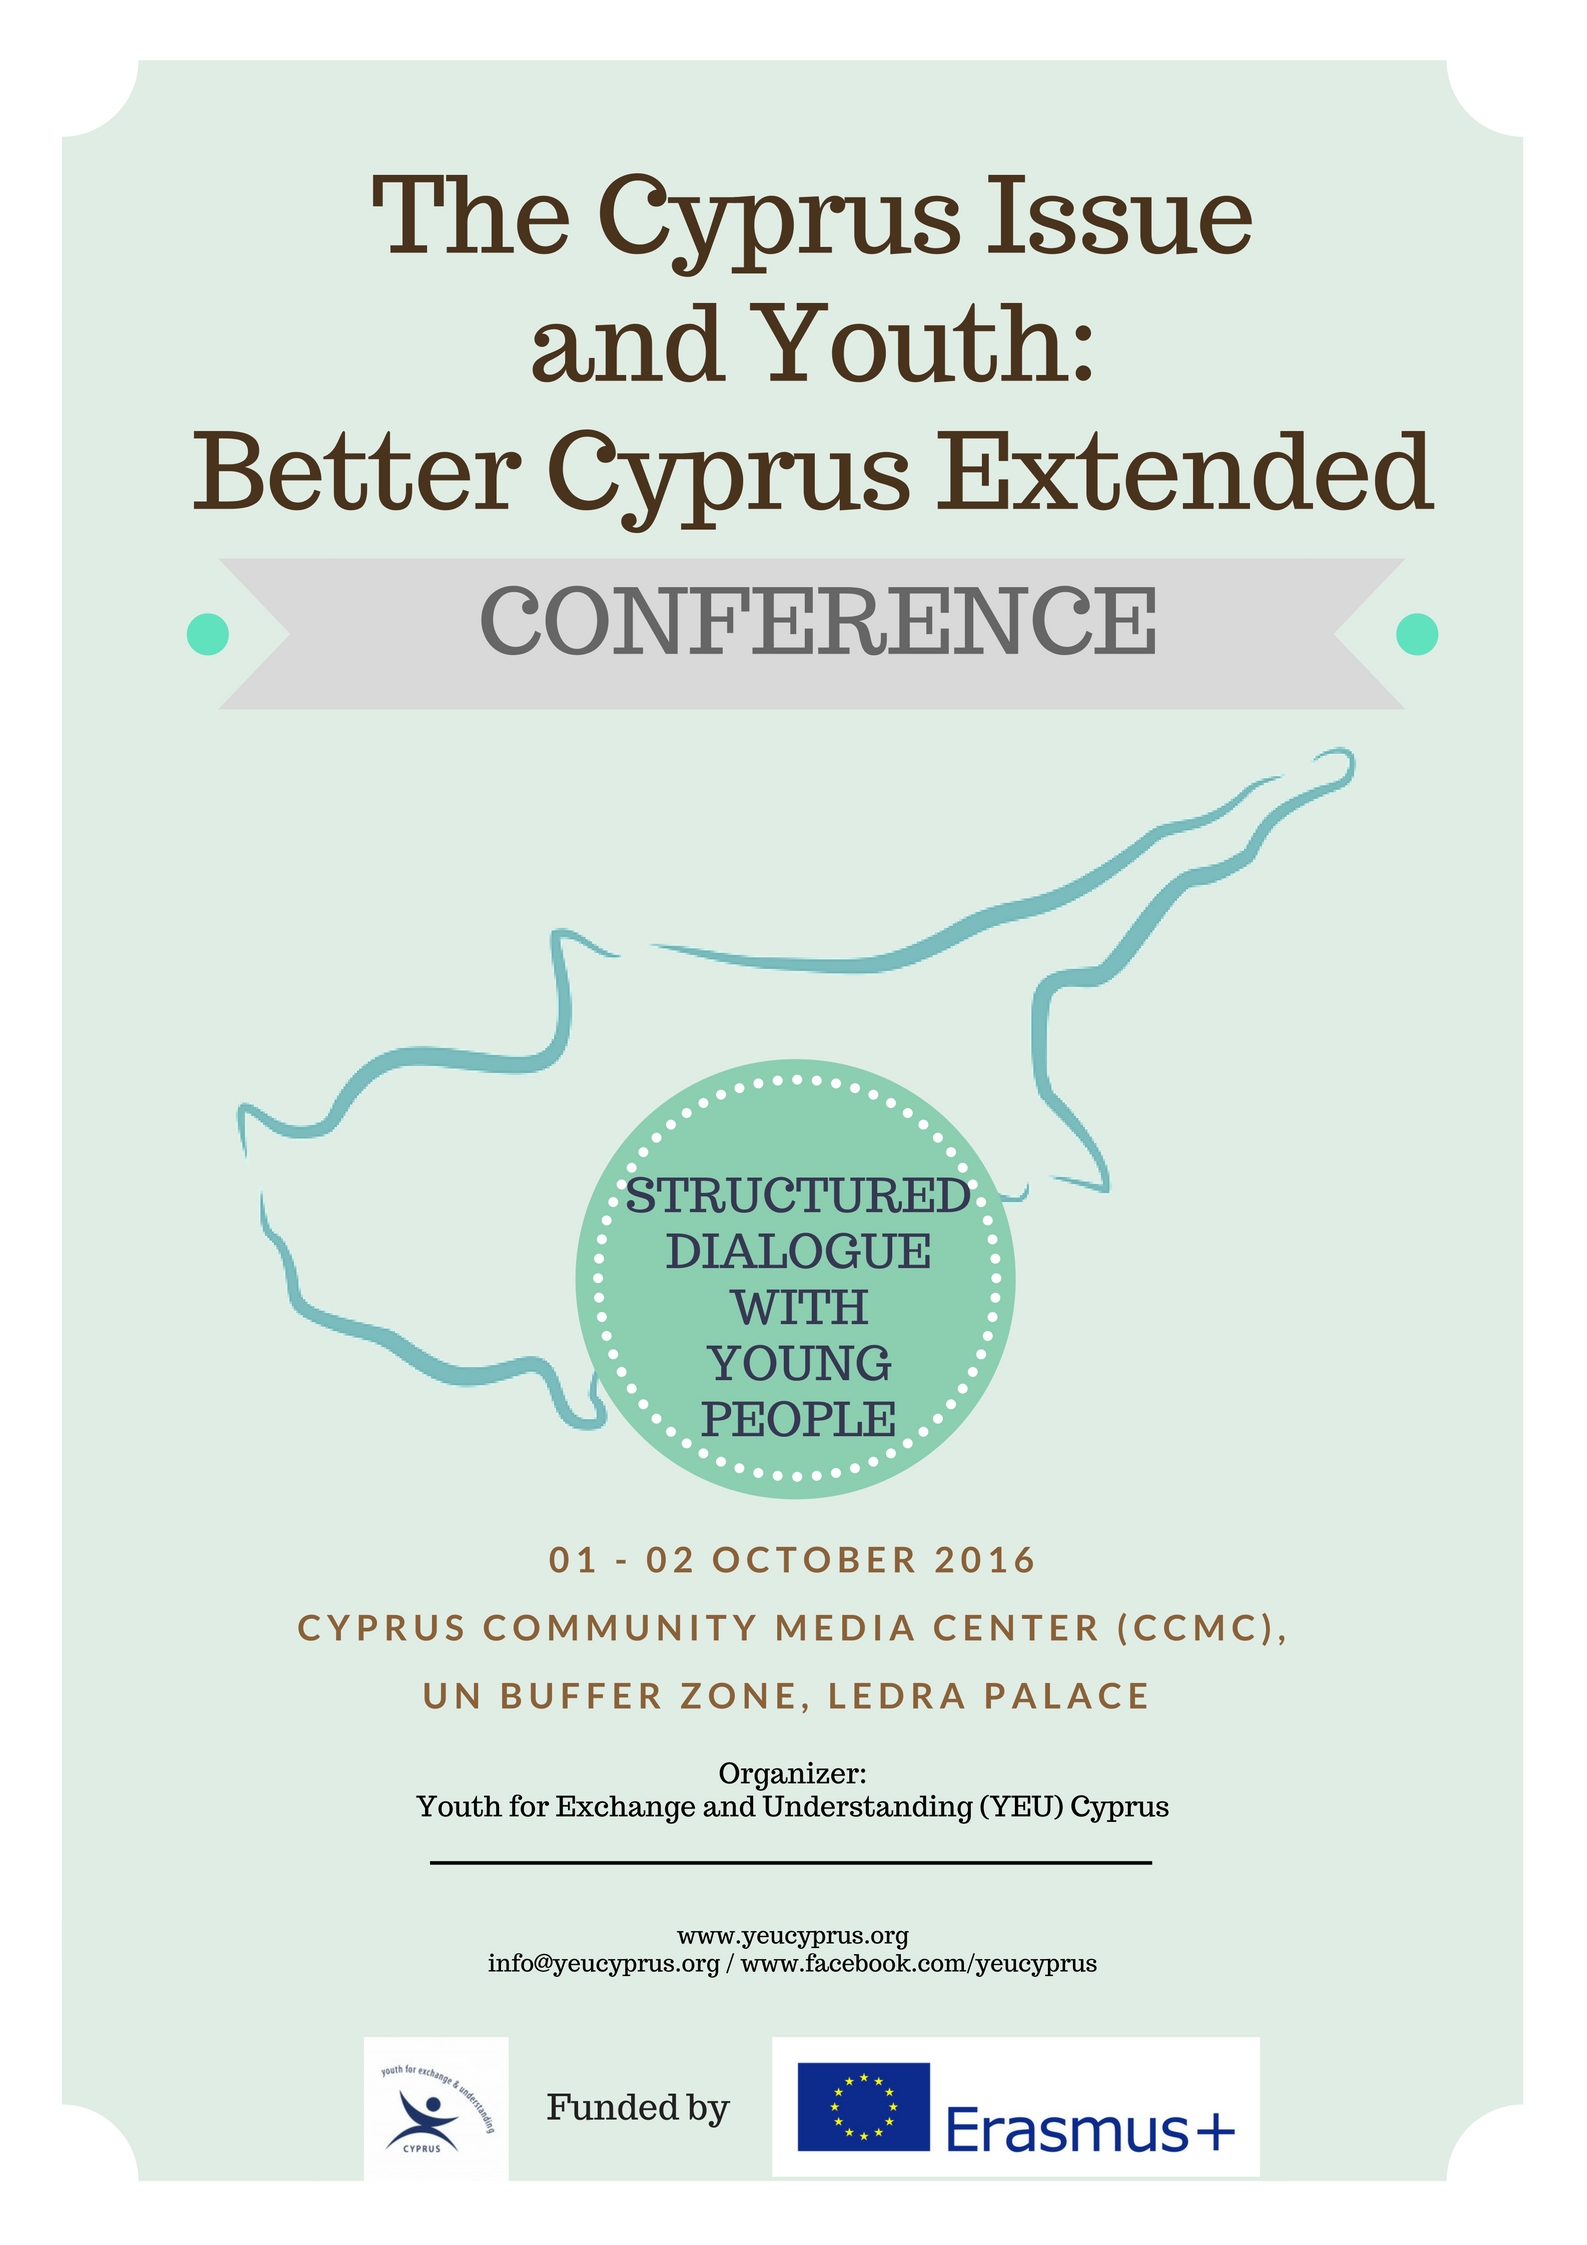 THE CYPRUS ISSUE AND YOUTH- BETTER CYPRUS EXTENDED